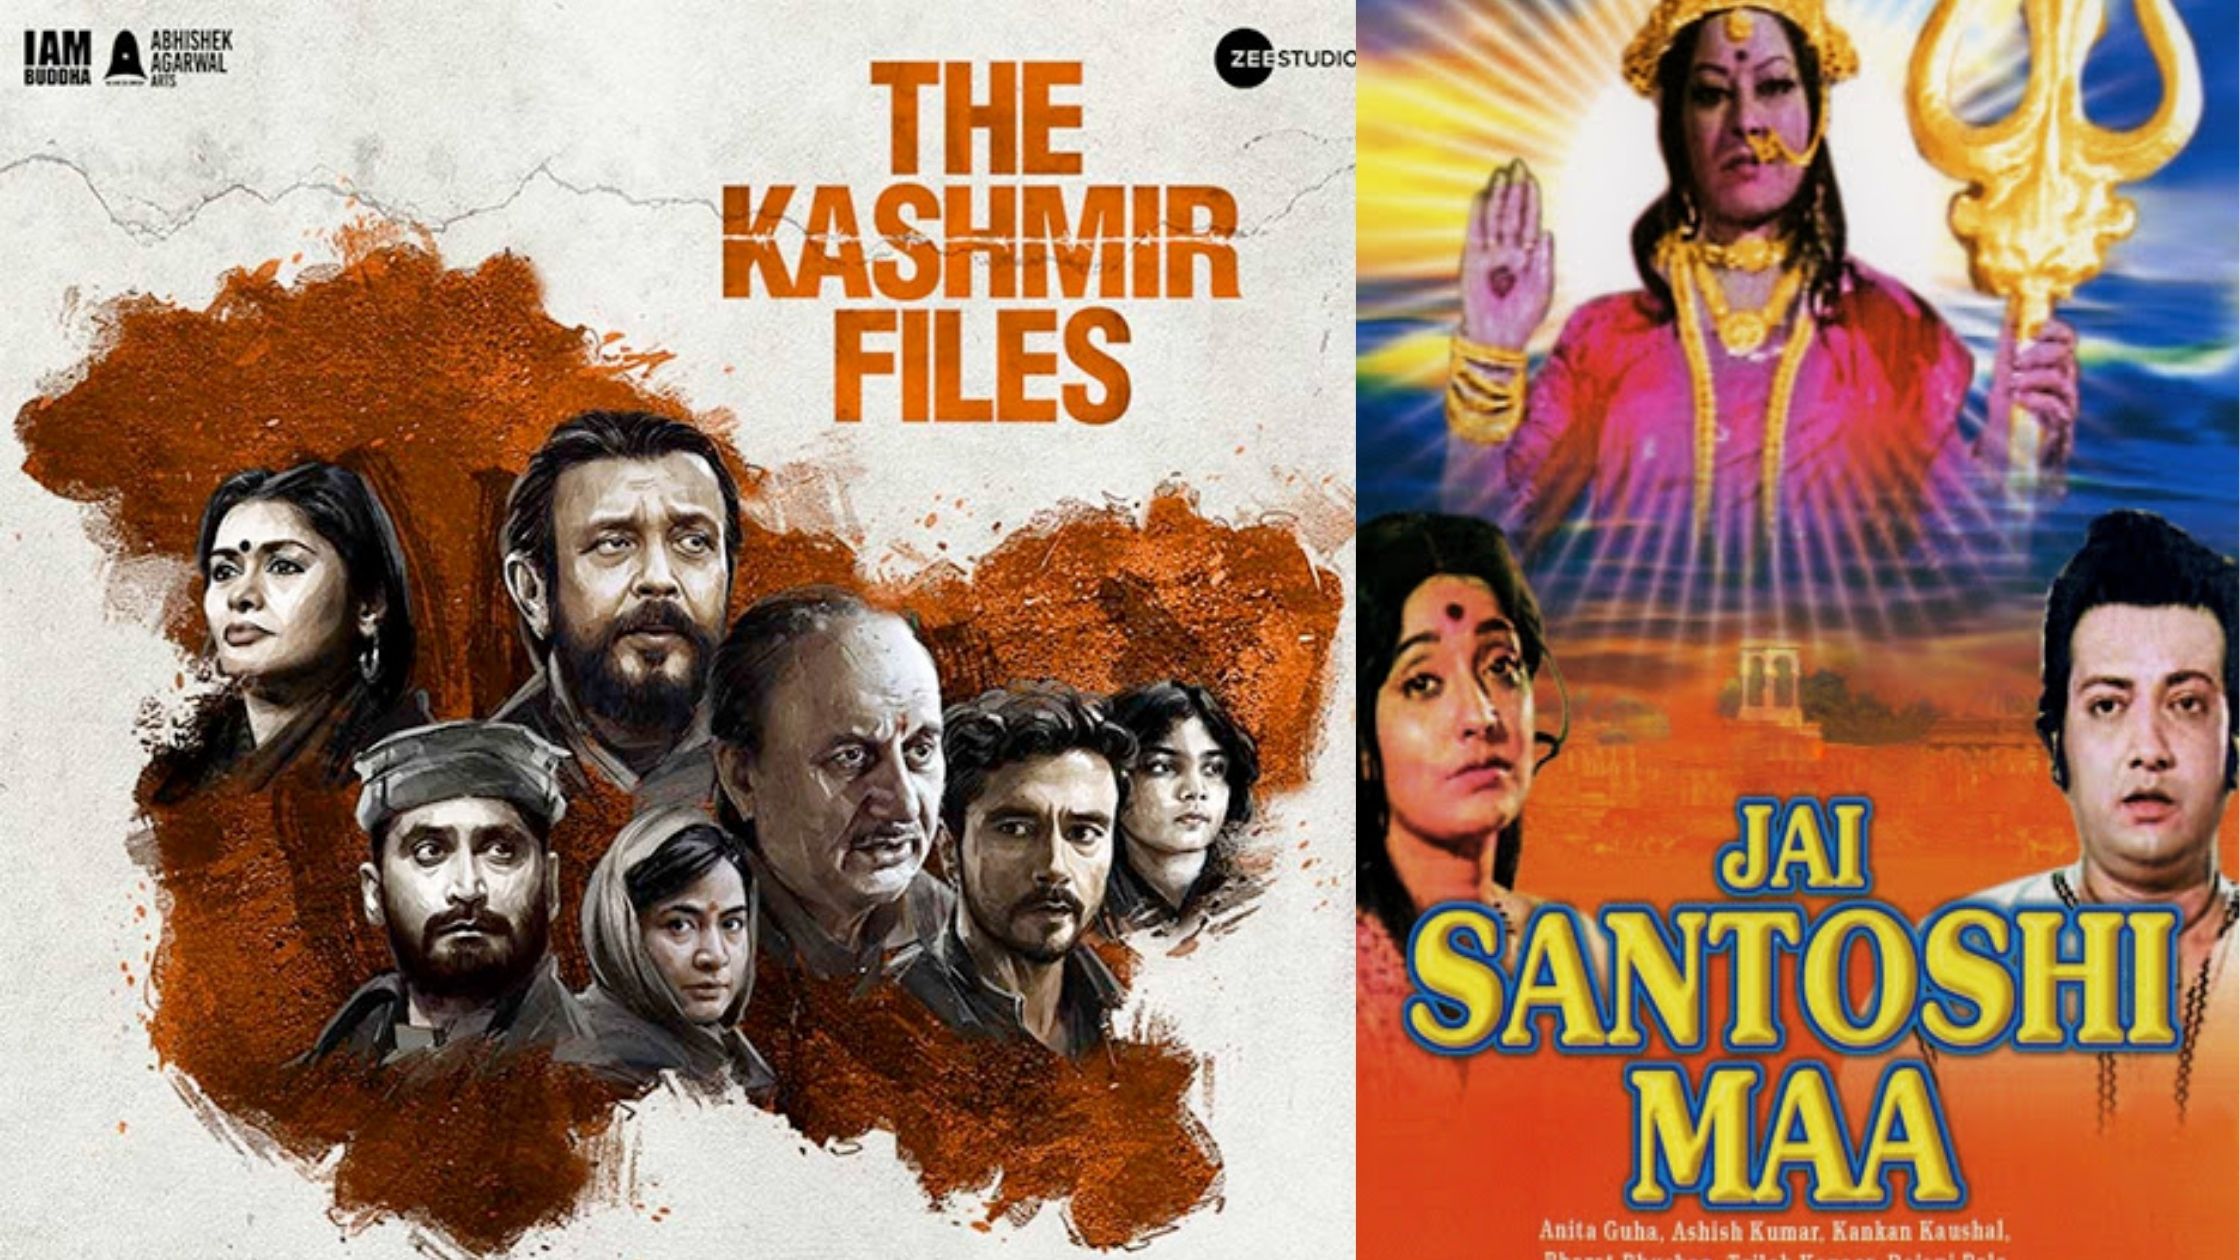 The Kashmir Files repeats the story of Jai Santoshi Maa after 47 years